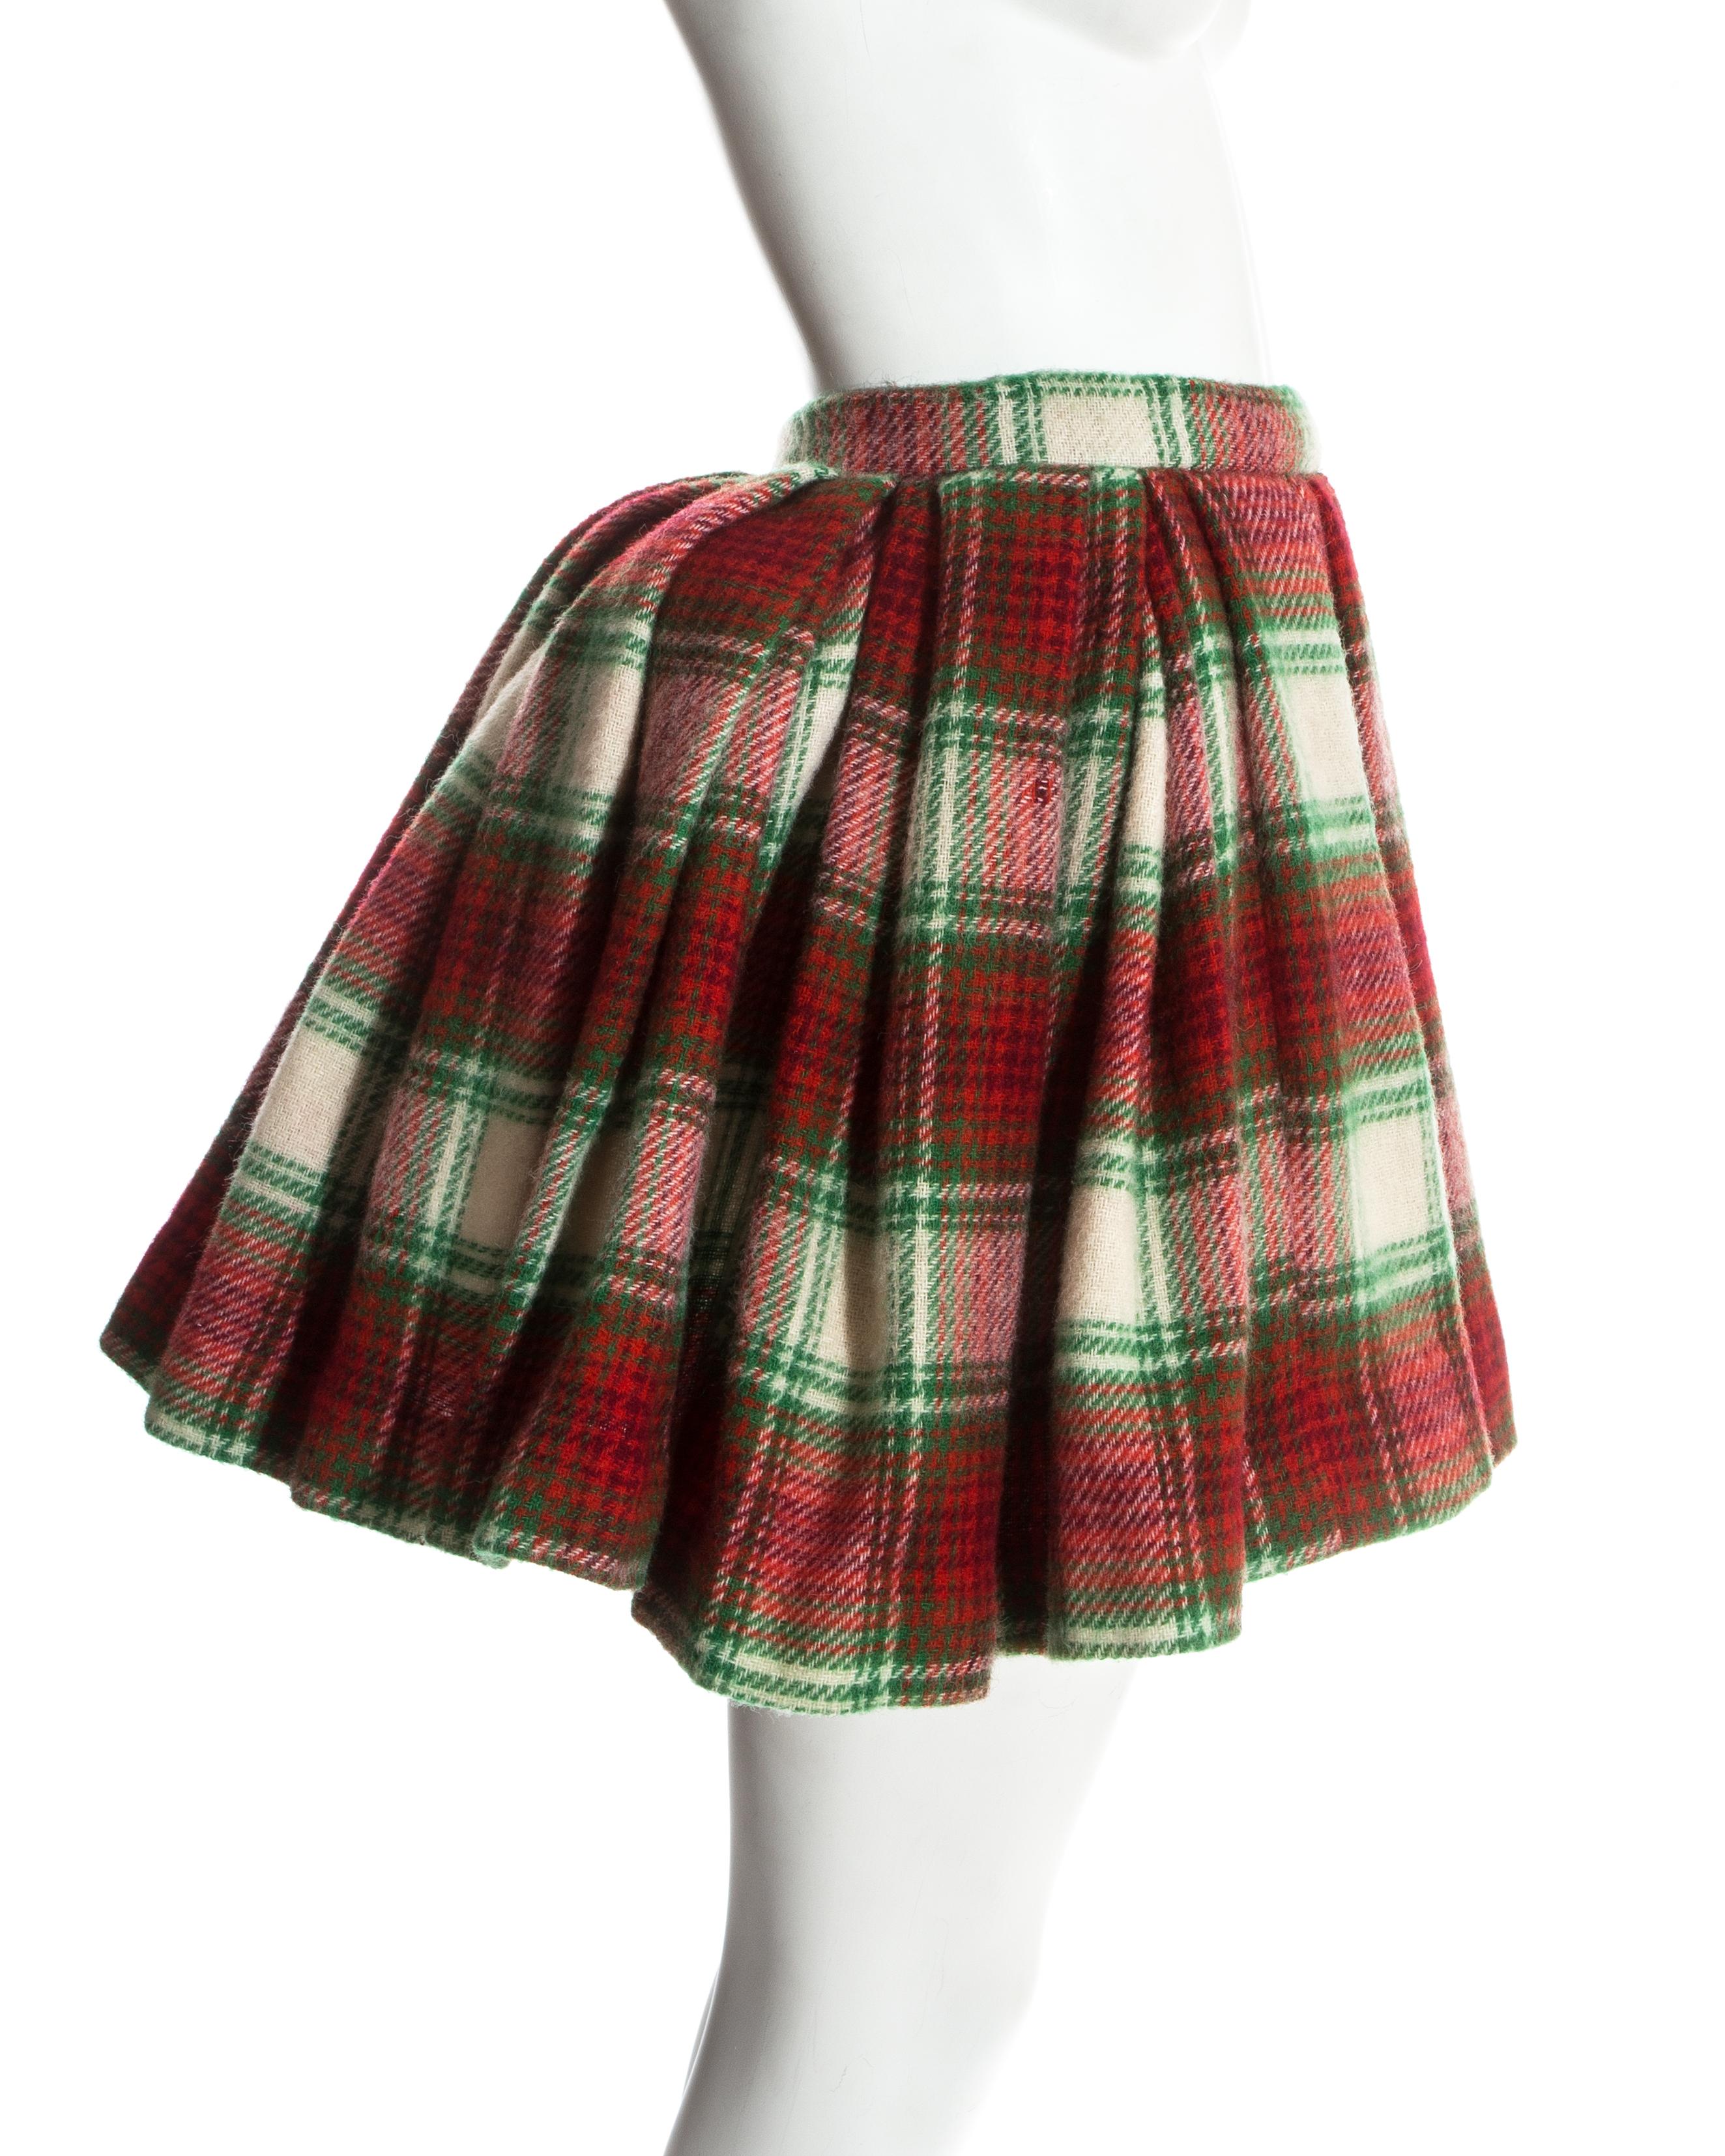 Vivienne Westwood Spring 1994 “Cafe Society” Checked Bustle Skirt & Wa –  Studded Petals Vintage